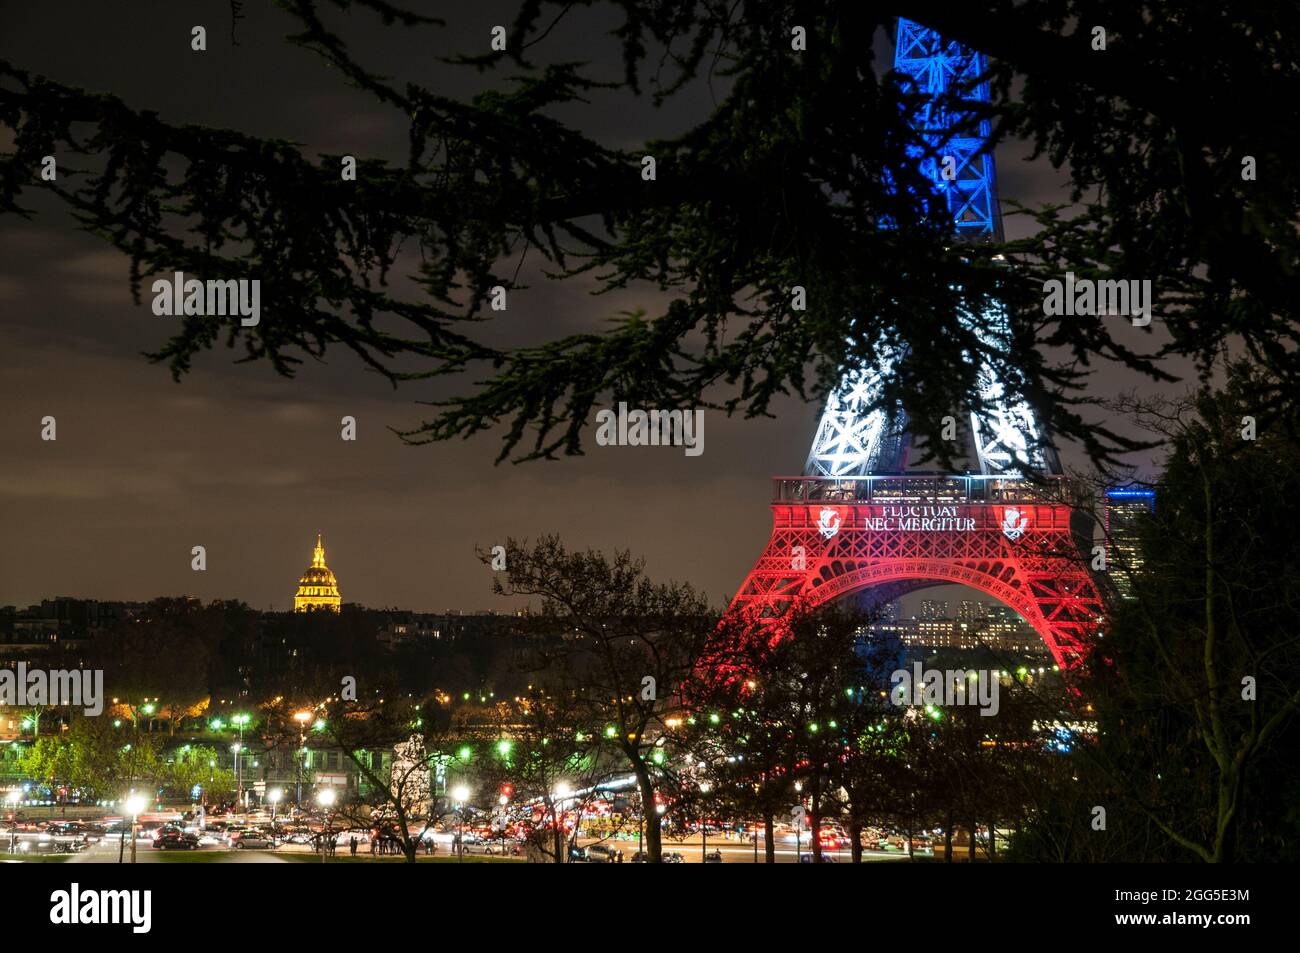 FRANCE. PARIS (7TH DISTRICT). 2015-11-16: THE EIFFEL TOWER IS LIT UP WITH THE COLORS OF THE FRENCH NATIONAL FLAG TO HONOR THE VICTIMS OF TERRORIST ATT Stock Photo